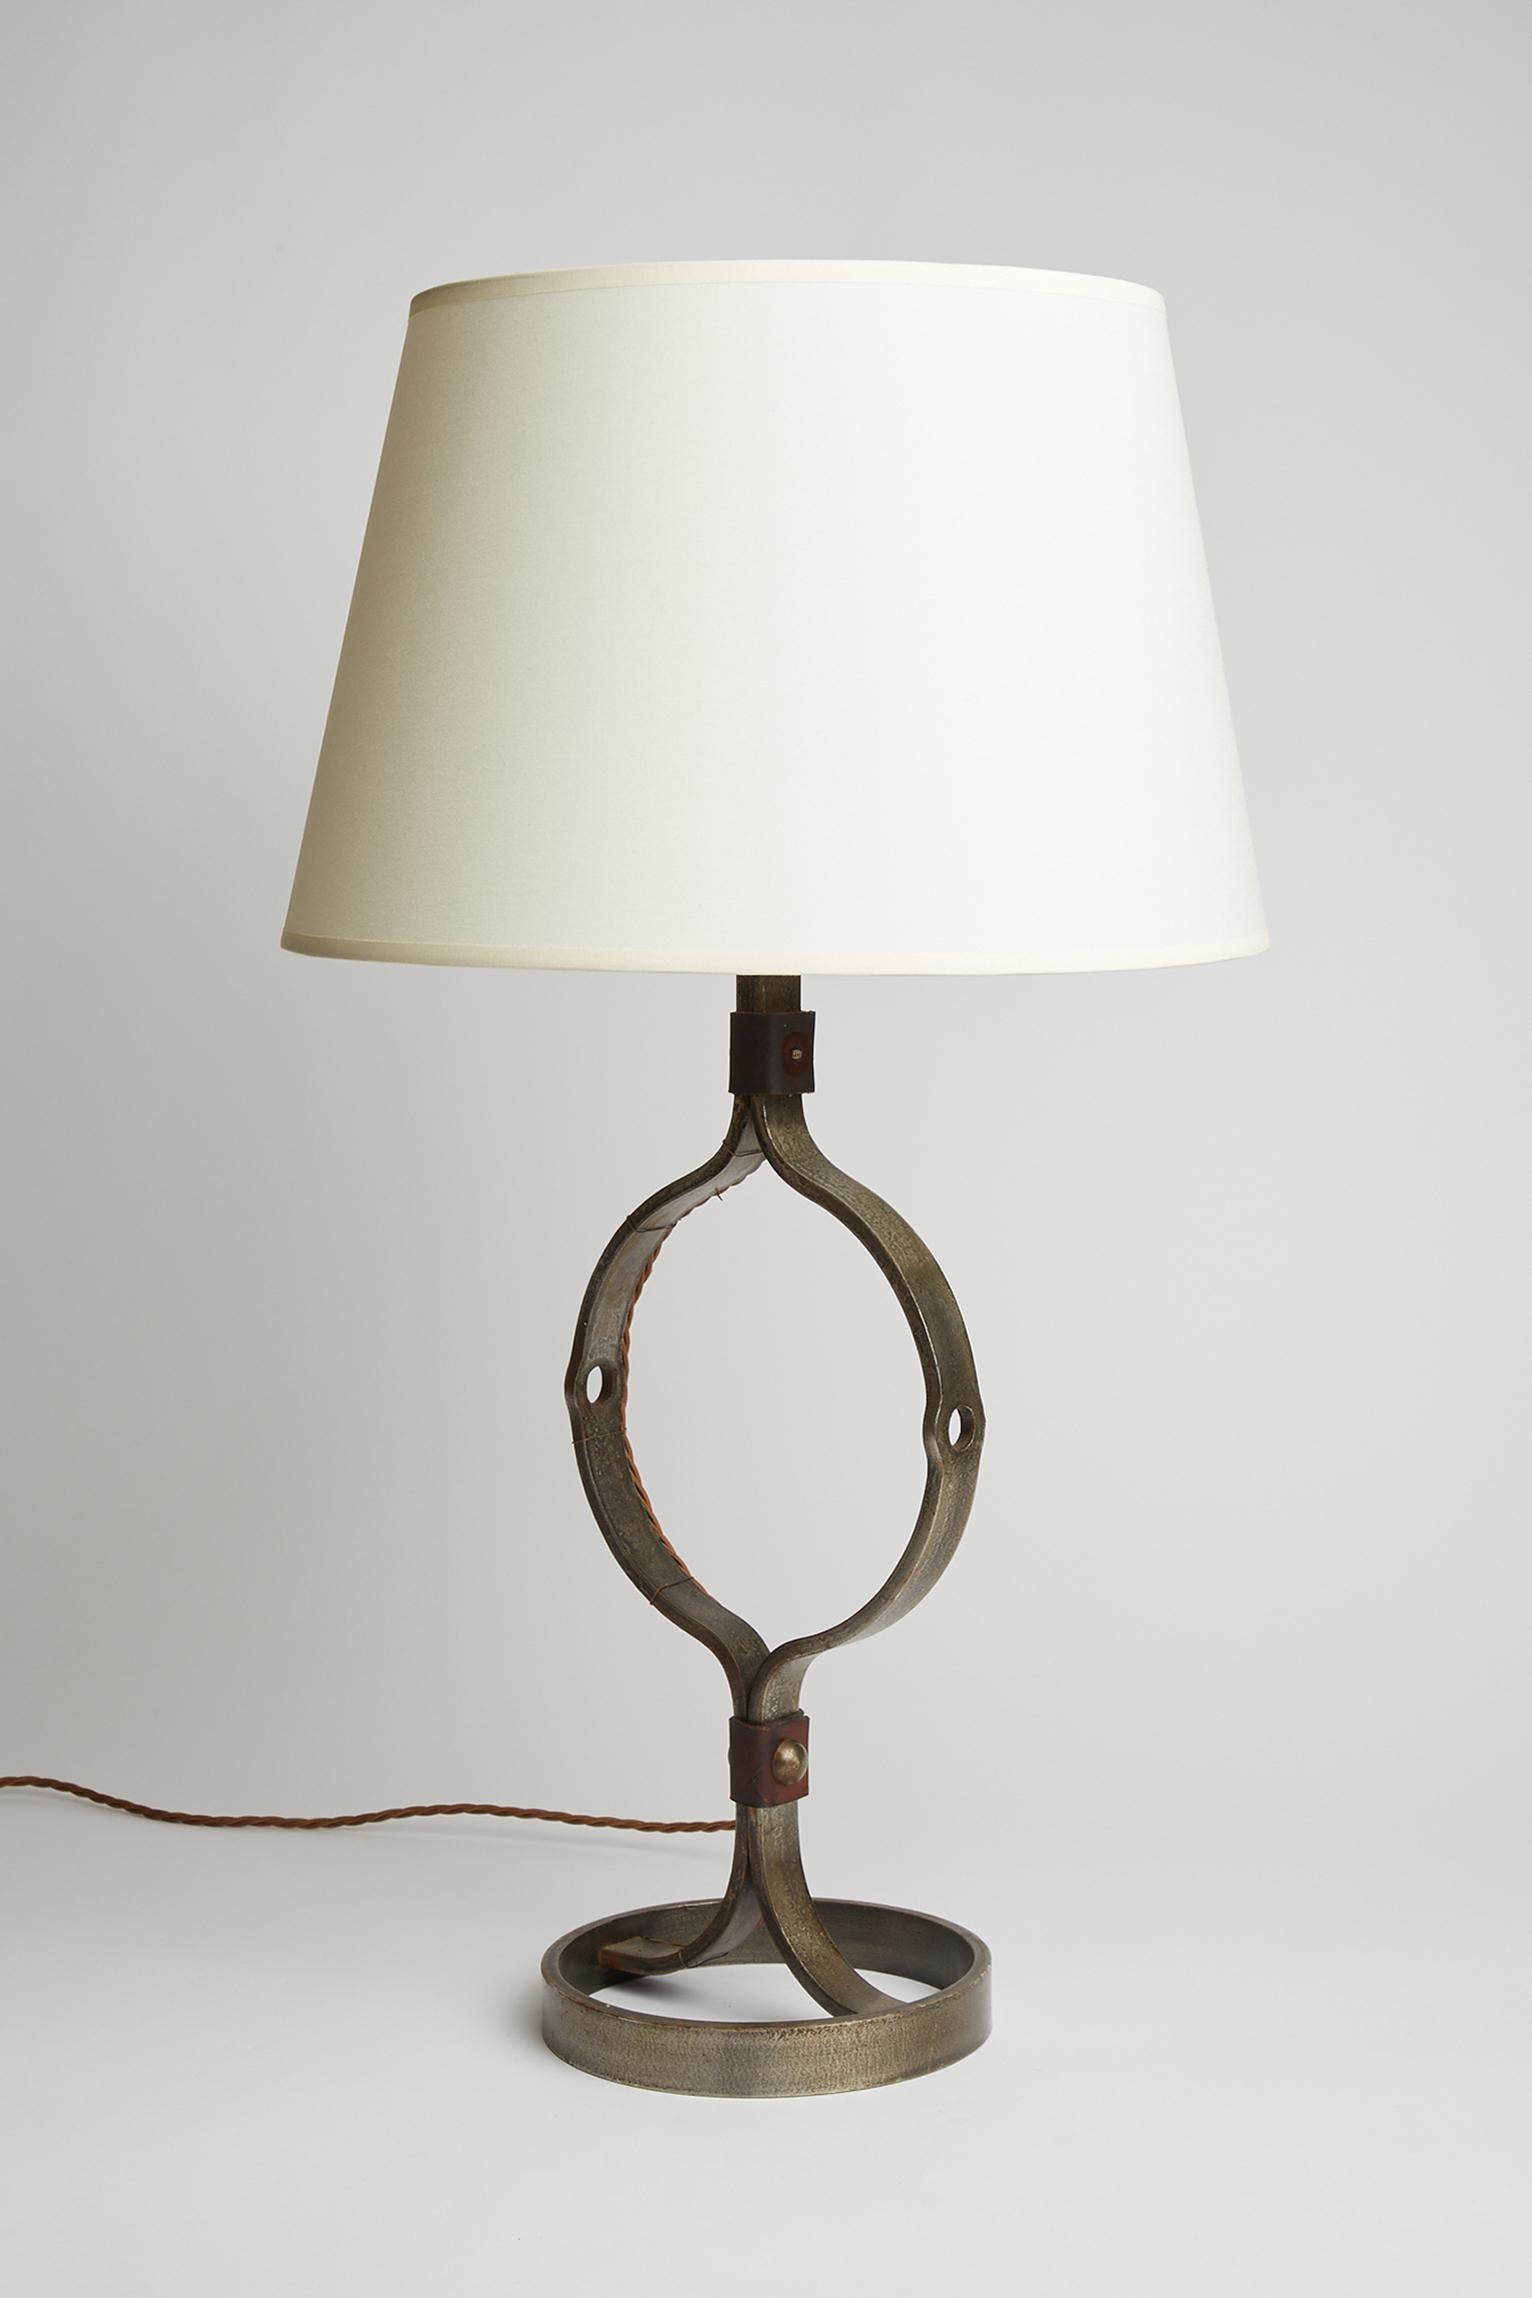 Mid-Century Iron and Leather Table Lamp by Jean-Pierre Ryckaert In Good Condition For Sale In London, GB